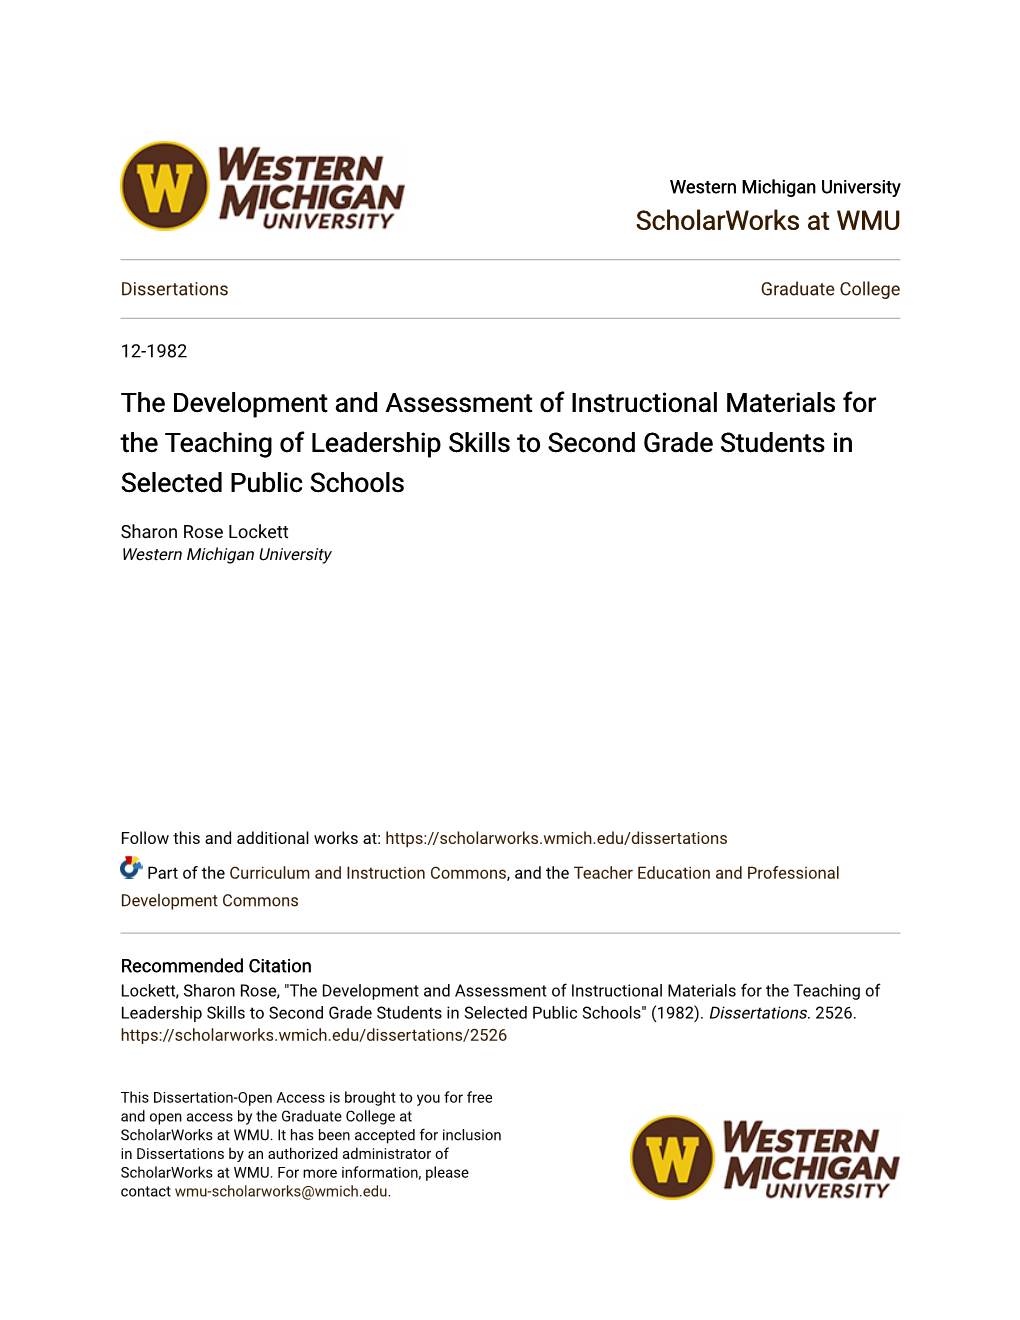 The Development and Assessment of Instructional Materials for the Teaching of Leadership Skills to Second Grade Students in Selected Public Schools